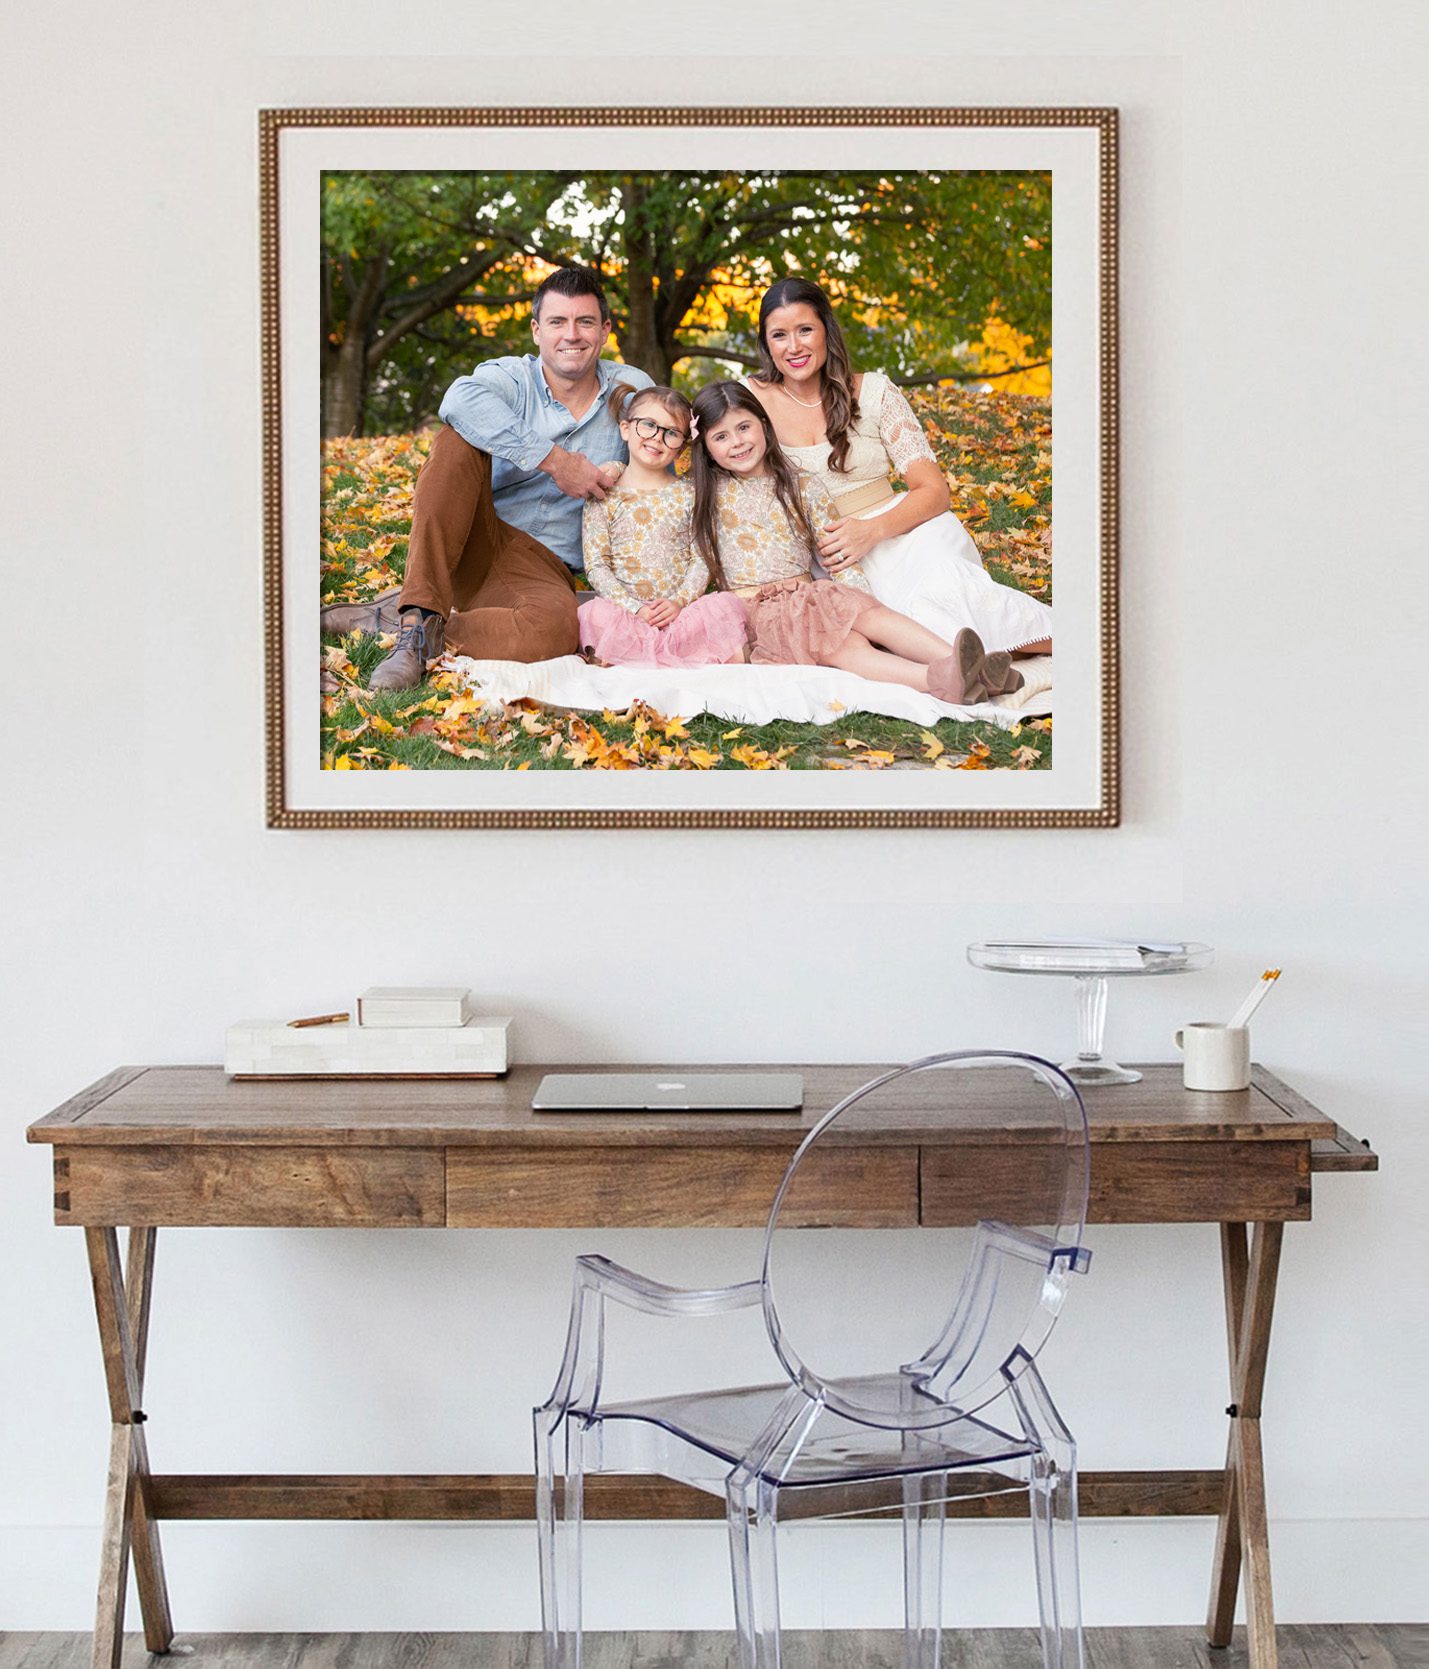 Framed photos for your home in ct.